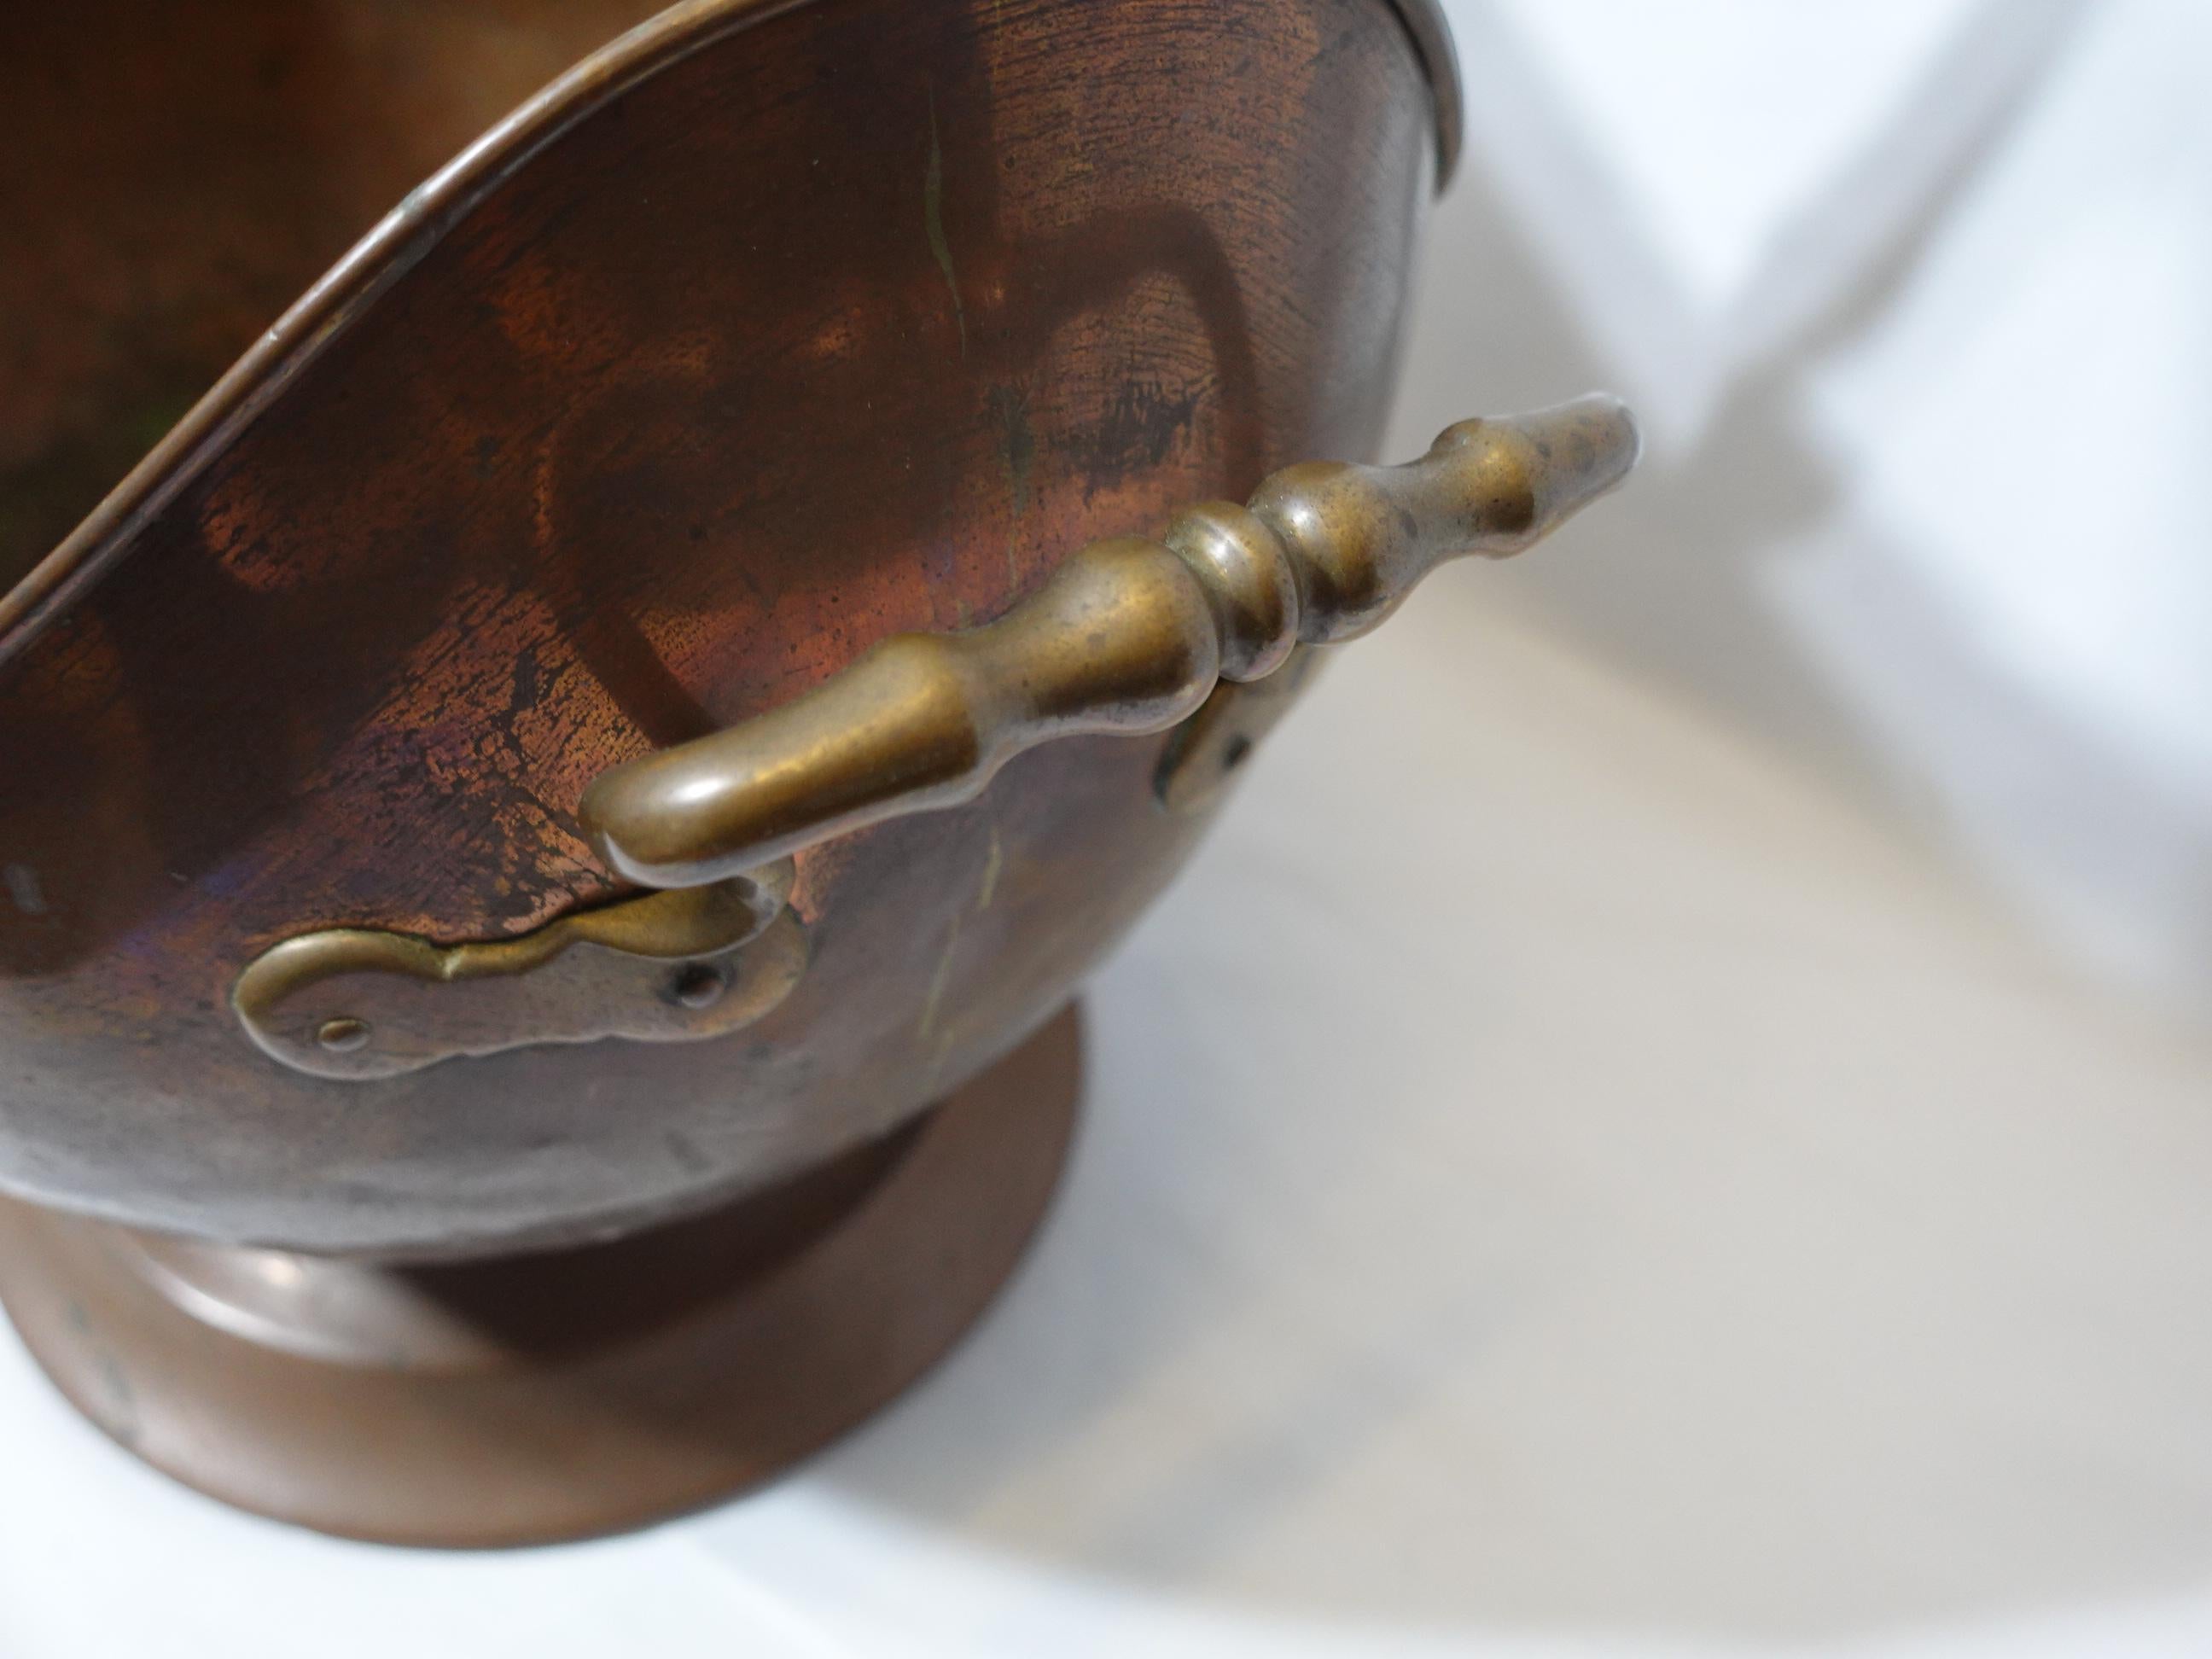 19th Century Antique Large Solid Hand Hammered Copper Coal Scuttle W/ Handle CO#009, 19th C. For Sale